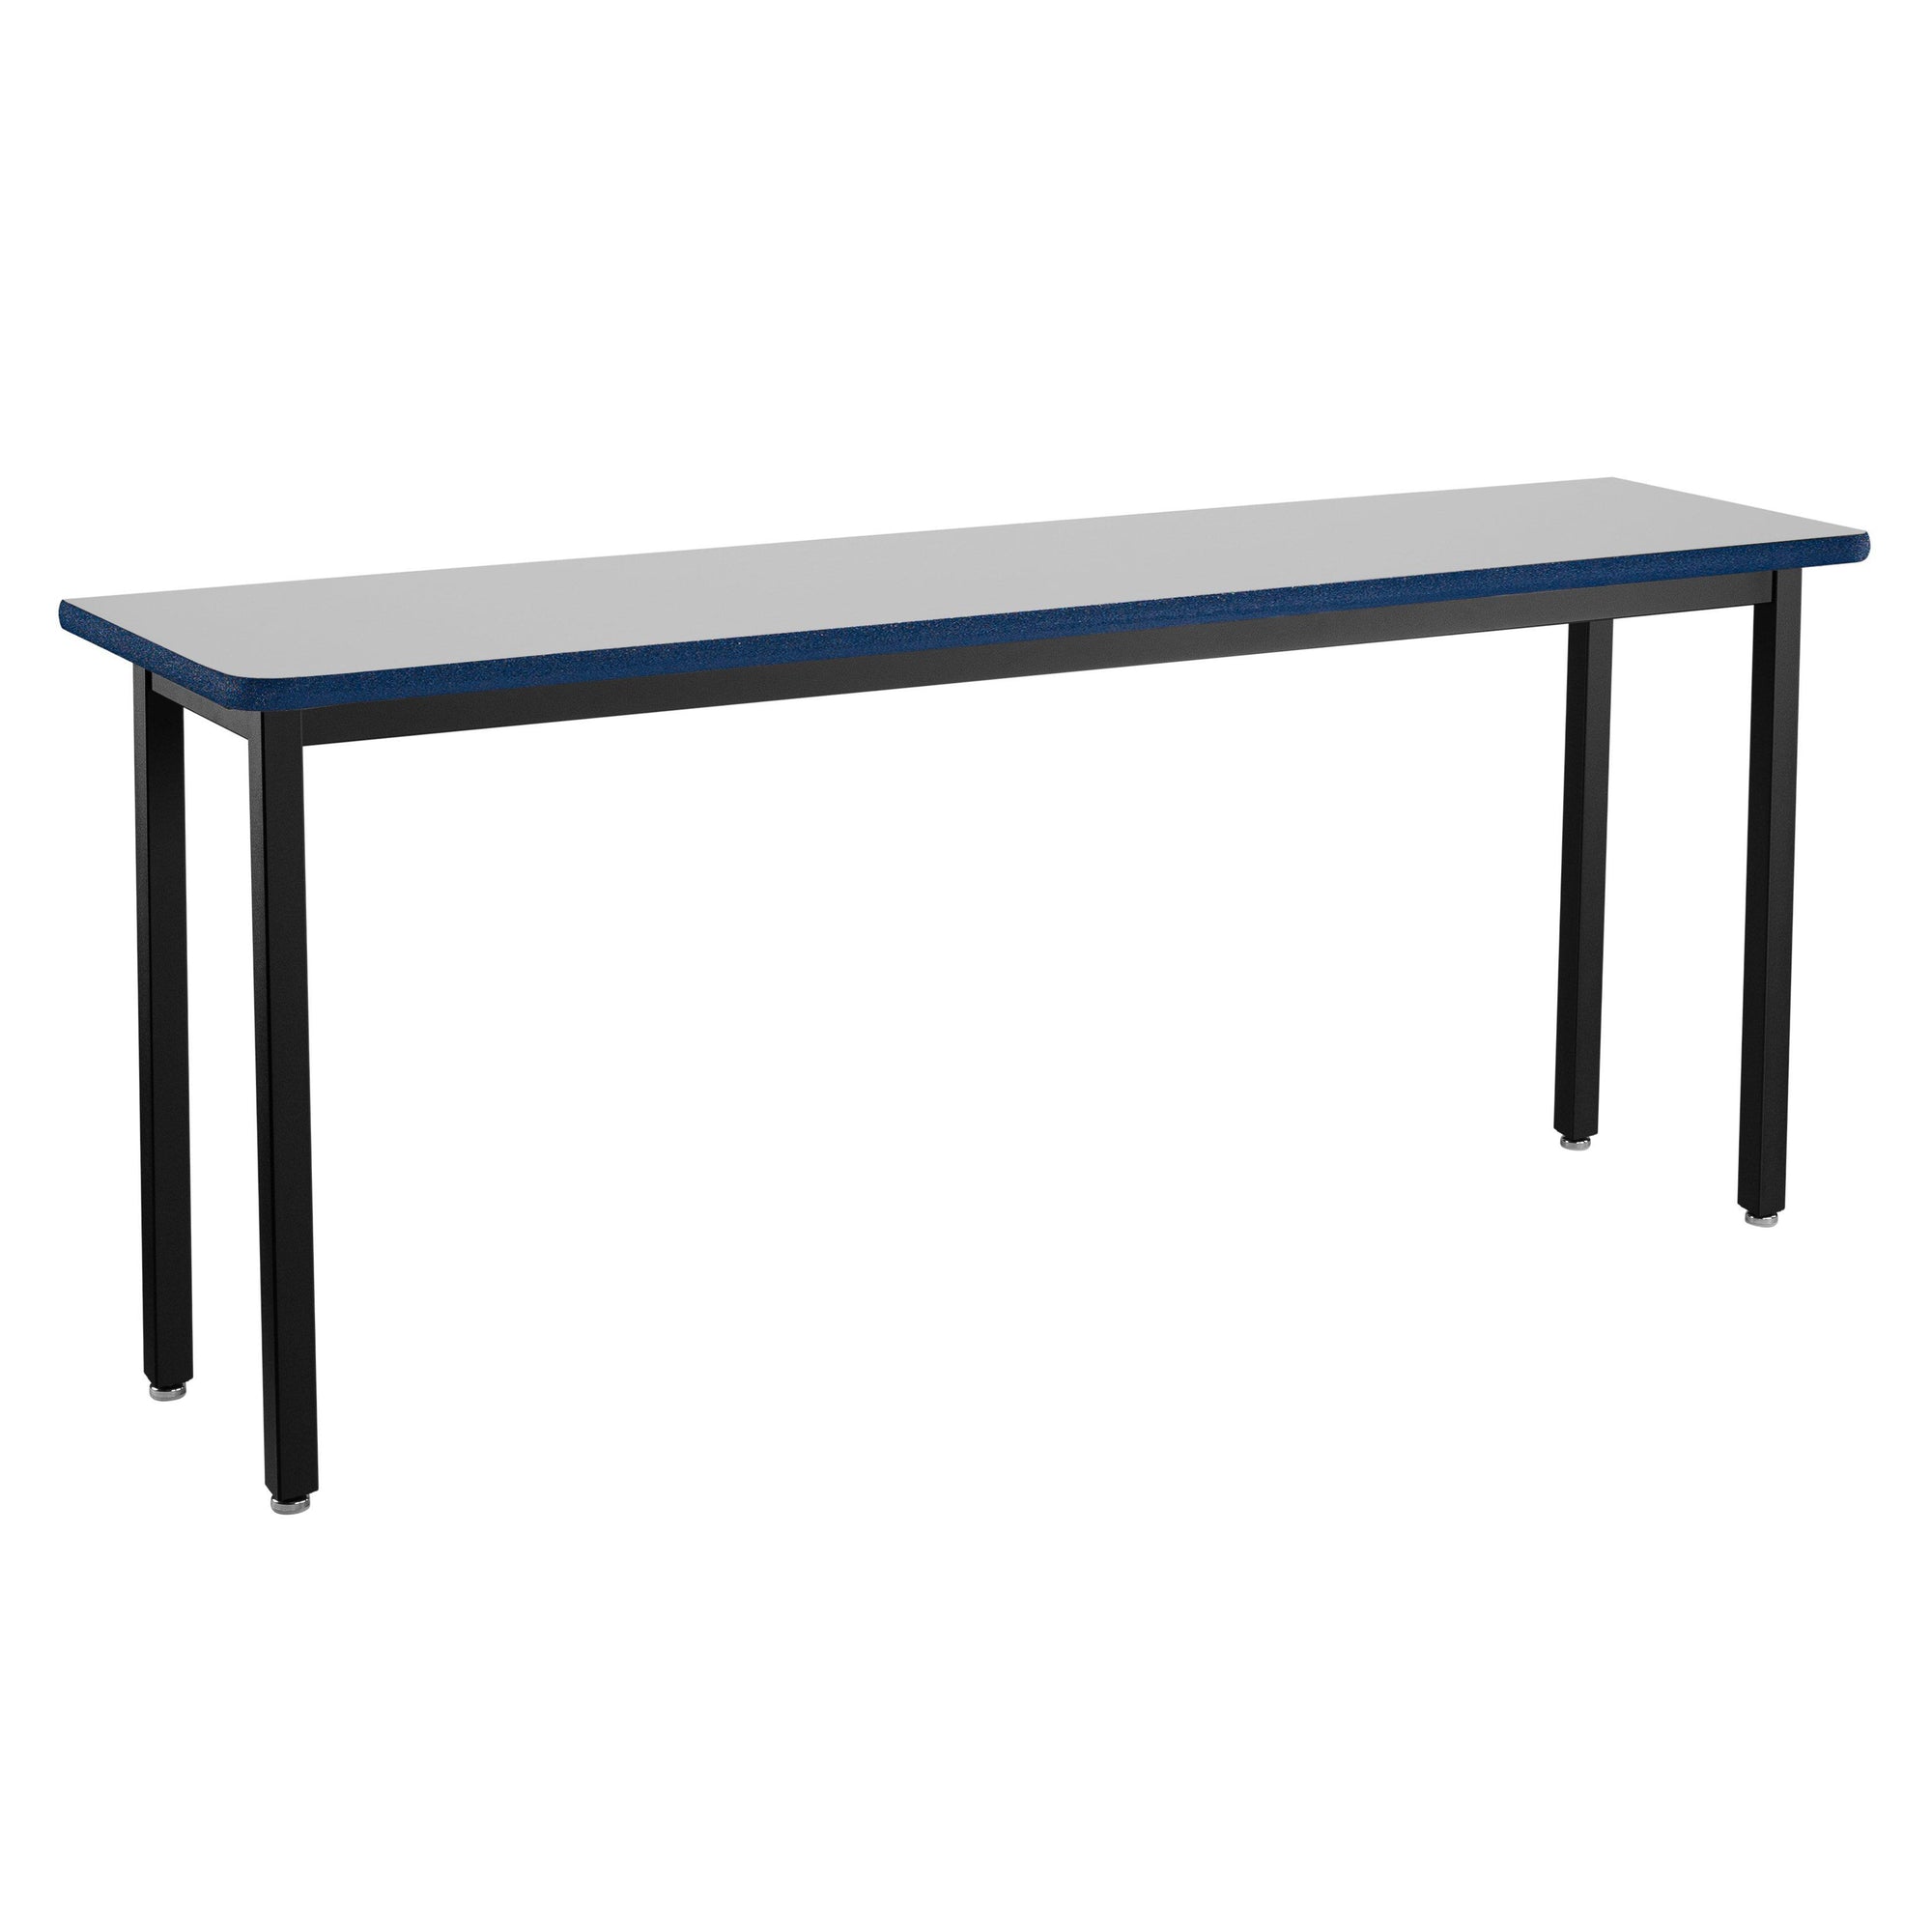 Heavy-Duty Fixed Height Utility Table, Black Frame, 18" x 84", Supreme High-Pressure Laminate Top with Black ProtectEdge